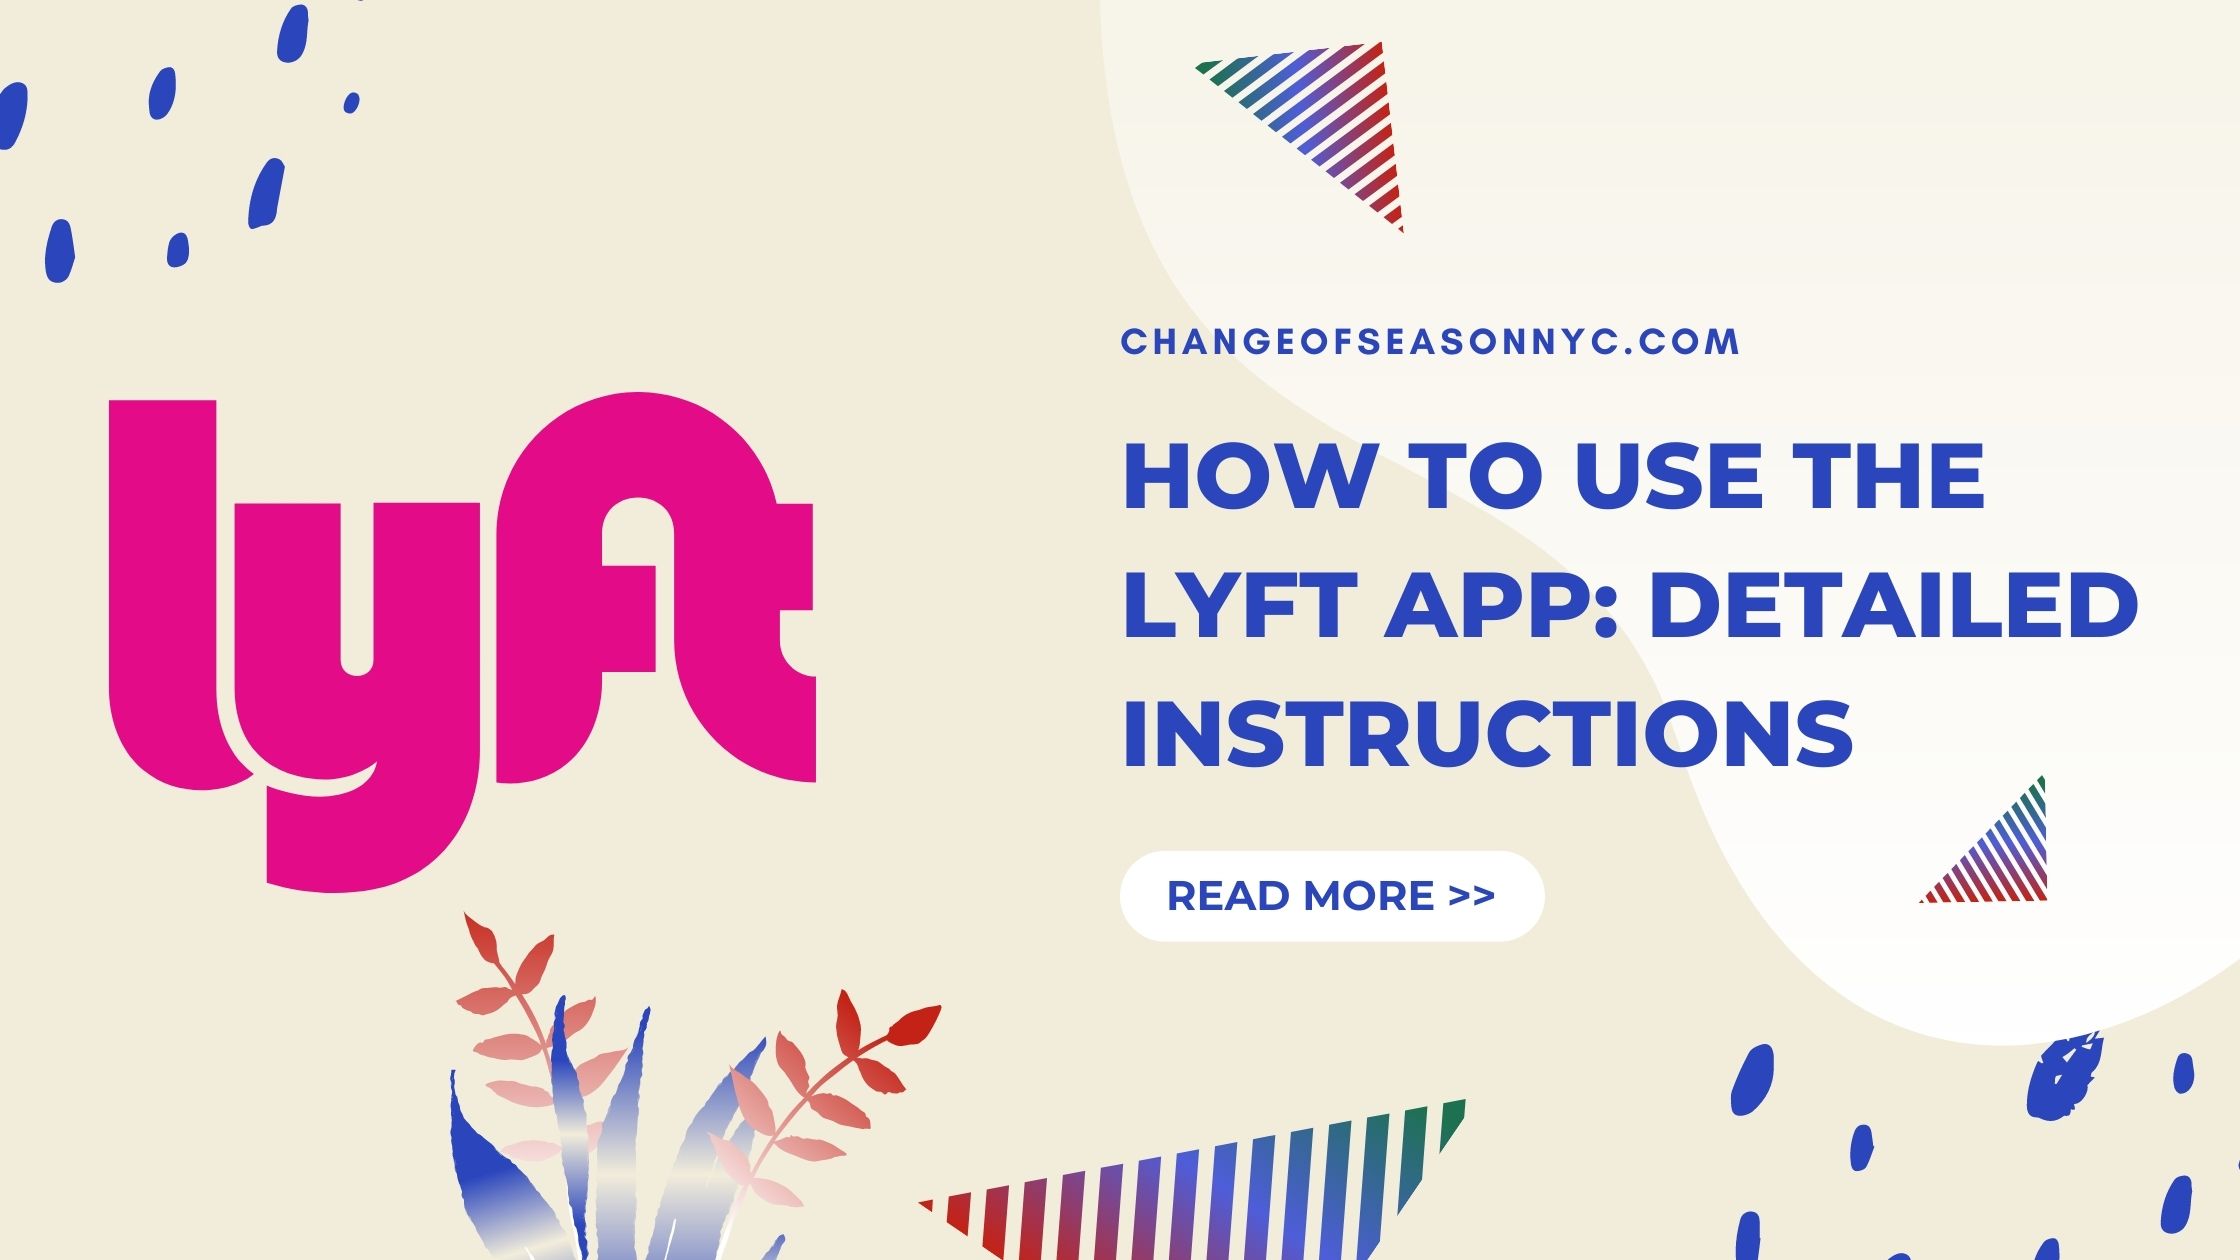 How to Use the Lyft App